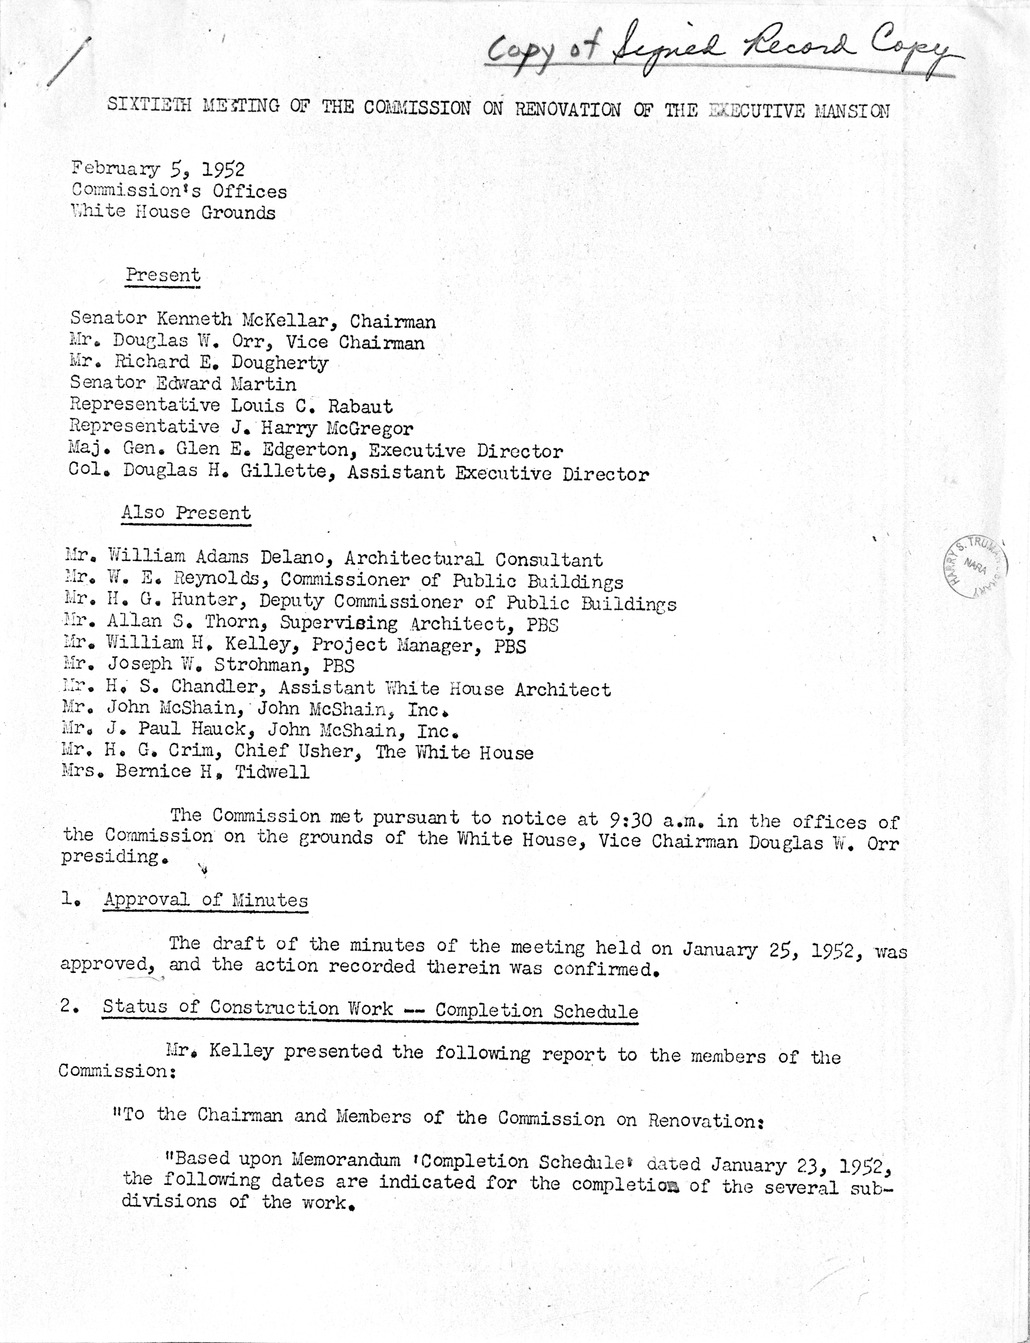 Minutes of the Sixtieth Meeting of the Commission on Renovation of the Executive Mansion